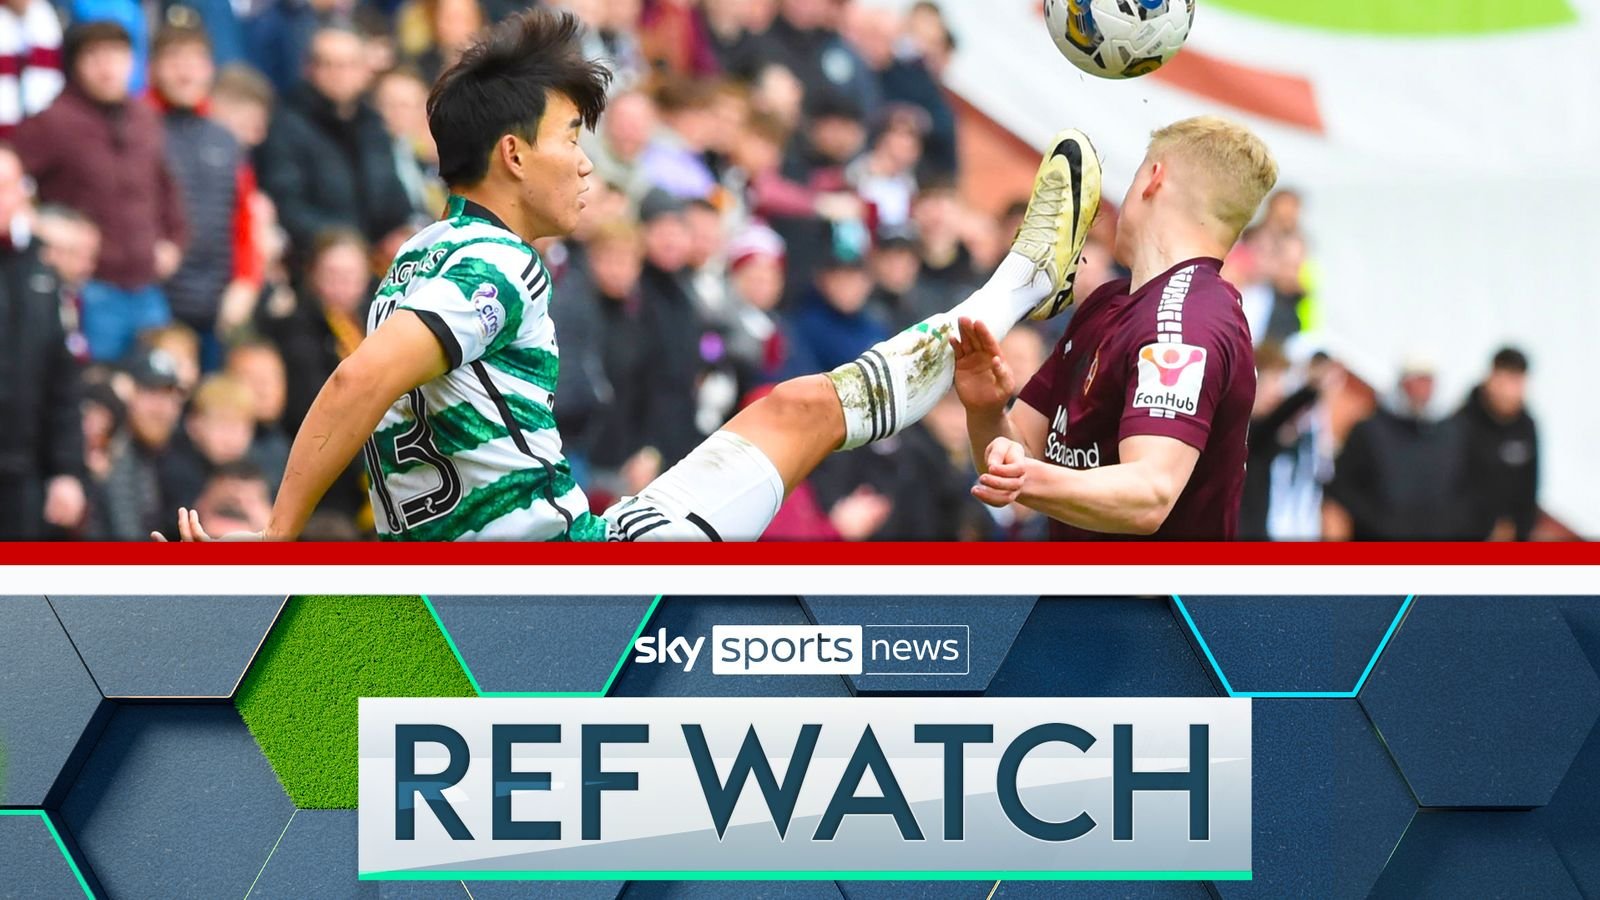 Ref Watch: Celtic, Rangers, Nottingham Forest and Liverpool controversy analysed by Dermot Gallagher | Football News